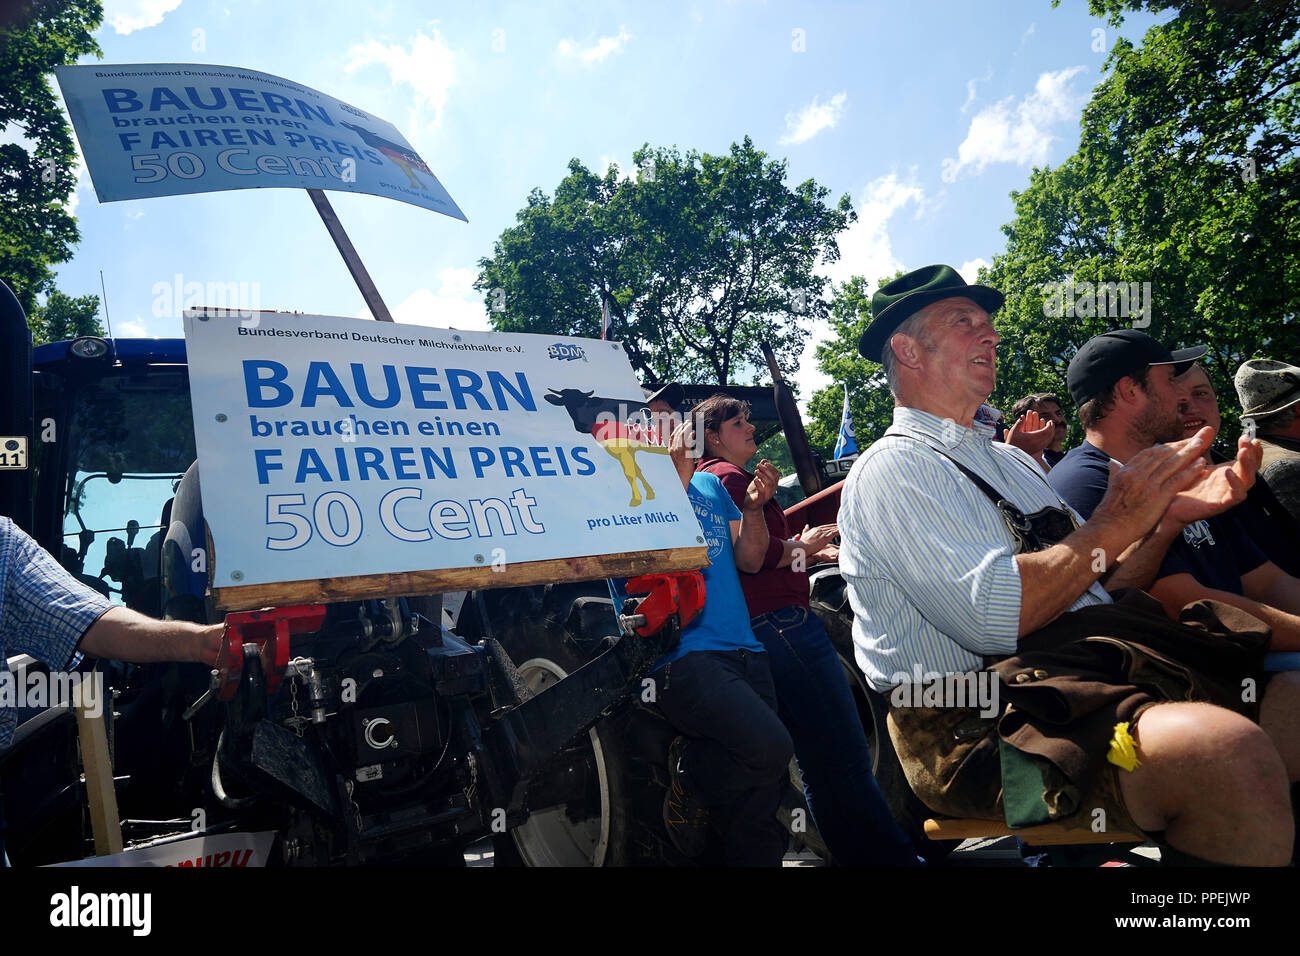 Hundreds of farmers demand a fair milk price at a demonstration in front of the Bavarian State Chancellery in Munich. At the same time  in the building is taking place a meeting of representatives of the farmers' association and the Bundesverband Deutscher Milchviehhalter (Federal Association of German Dairy Farmers) with the agriculture ministers of the Federation and the Free State led by Prime Minister Horst Seehofer. Stock Photo